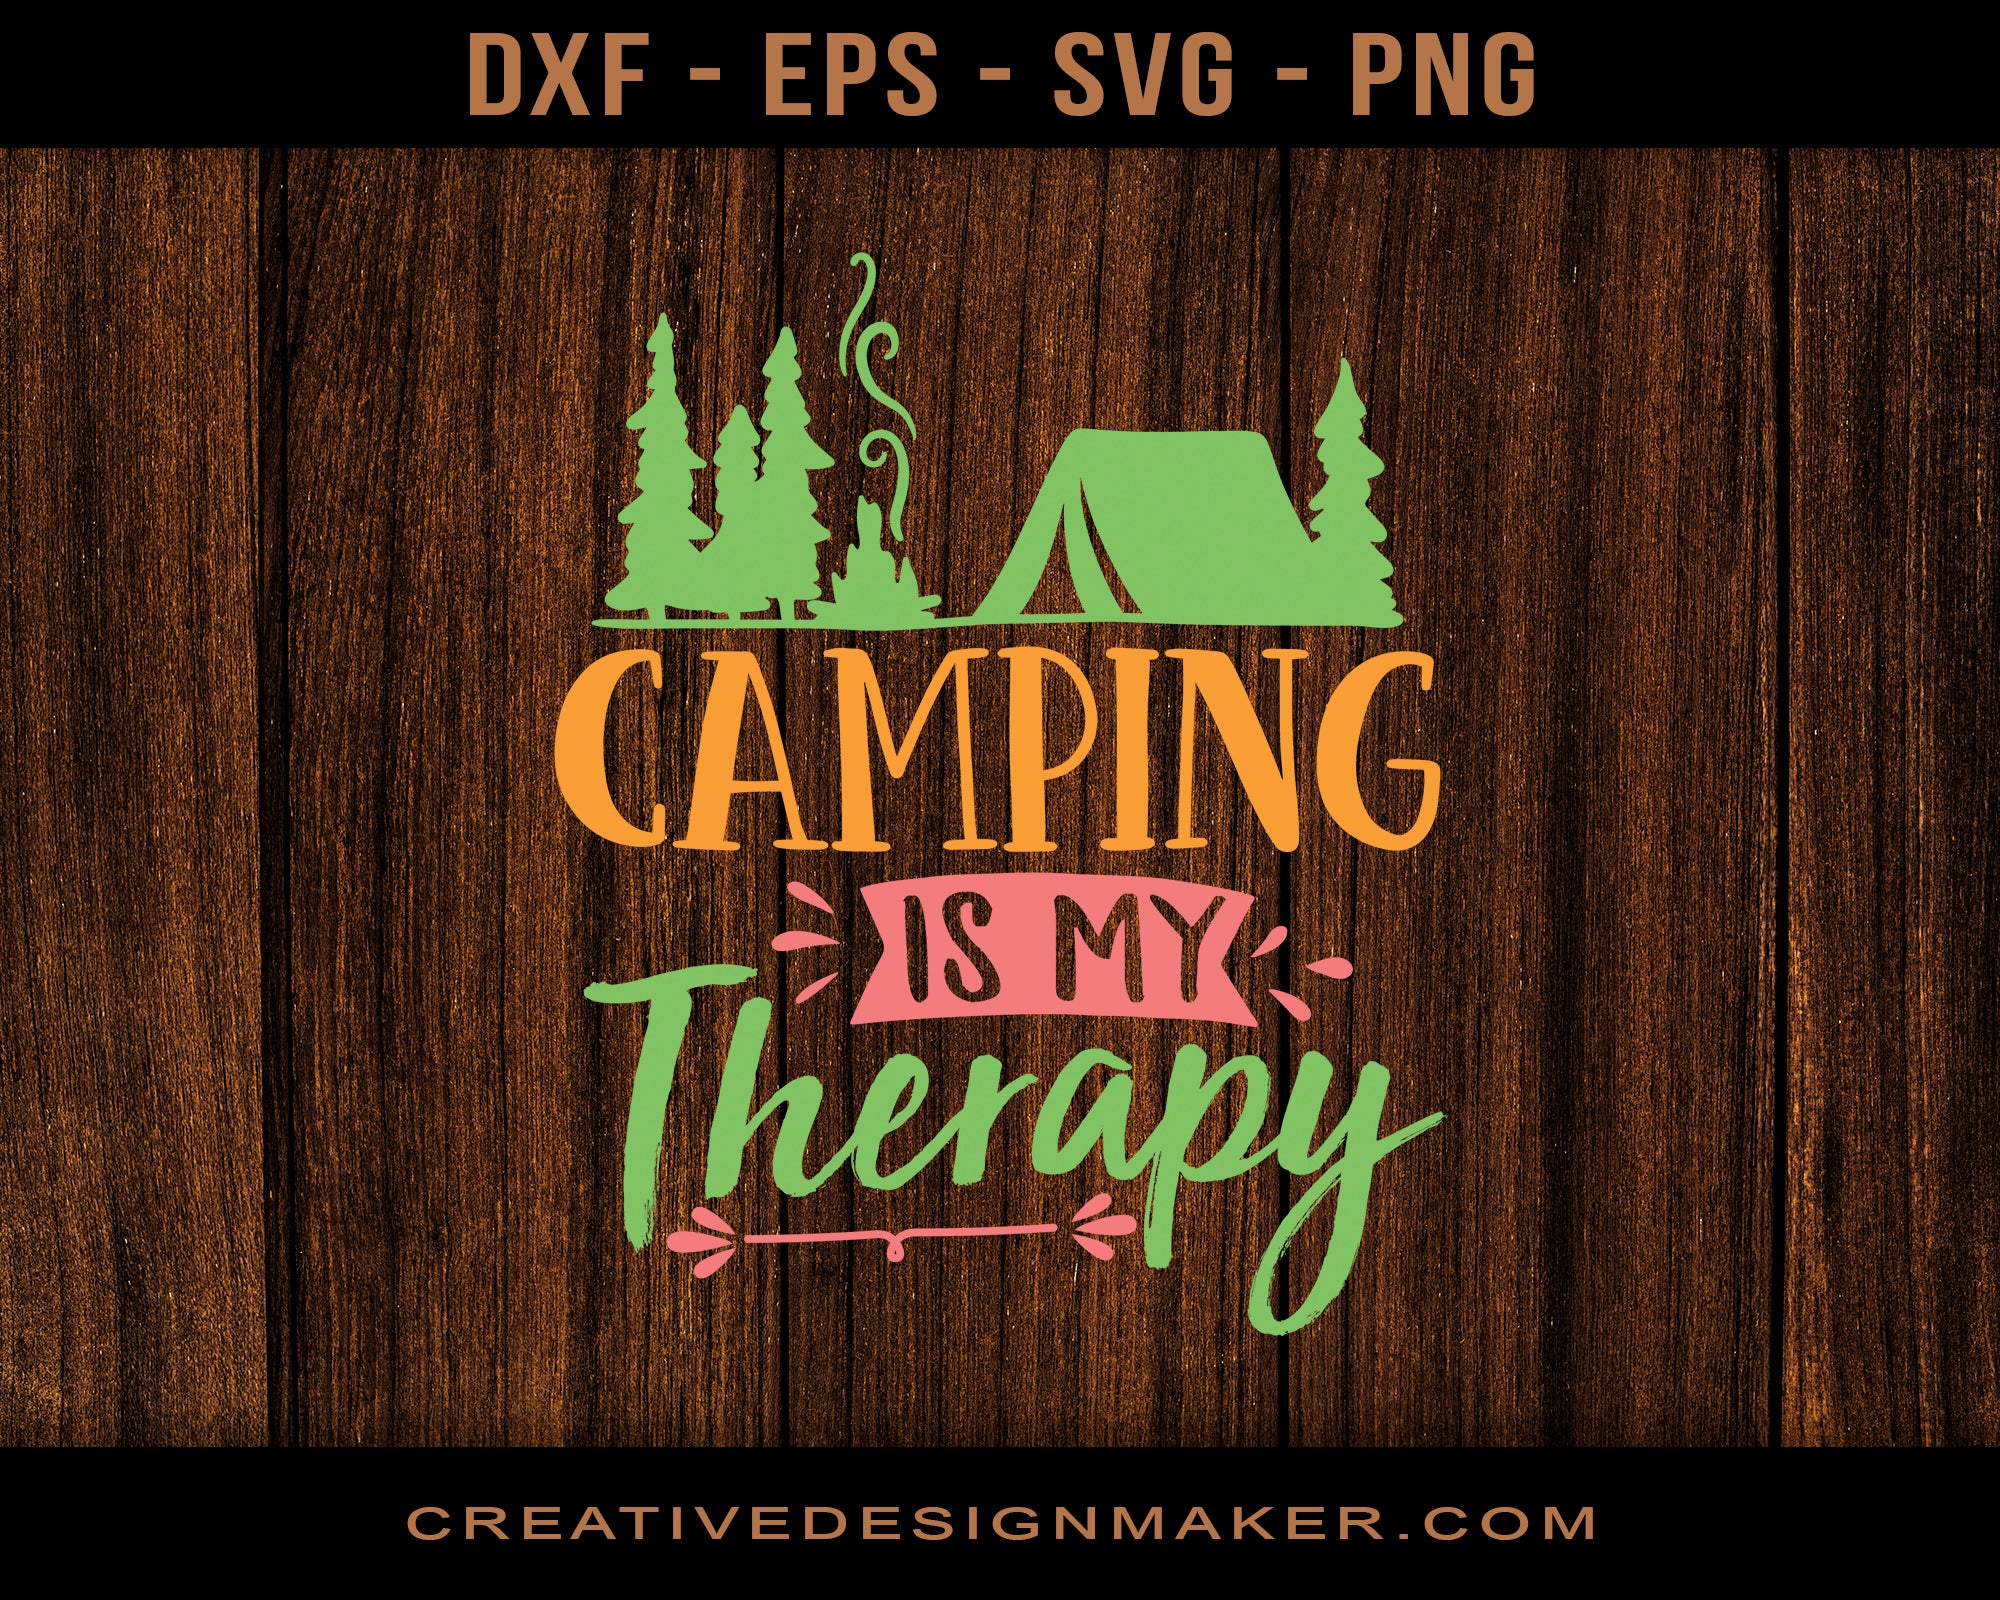 Camping is My Therapy Adventure Svg Dxf Png Eps Printable Files!